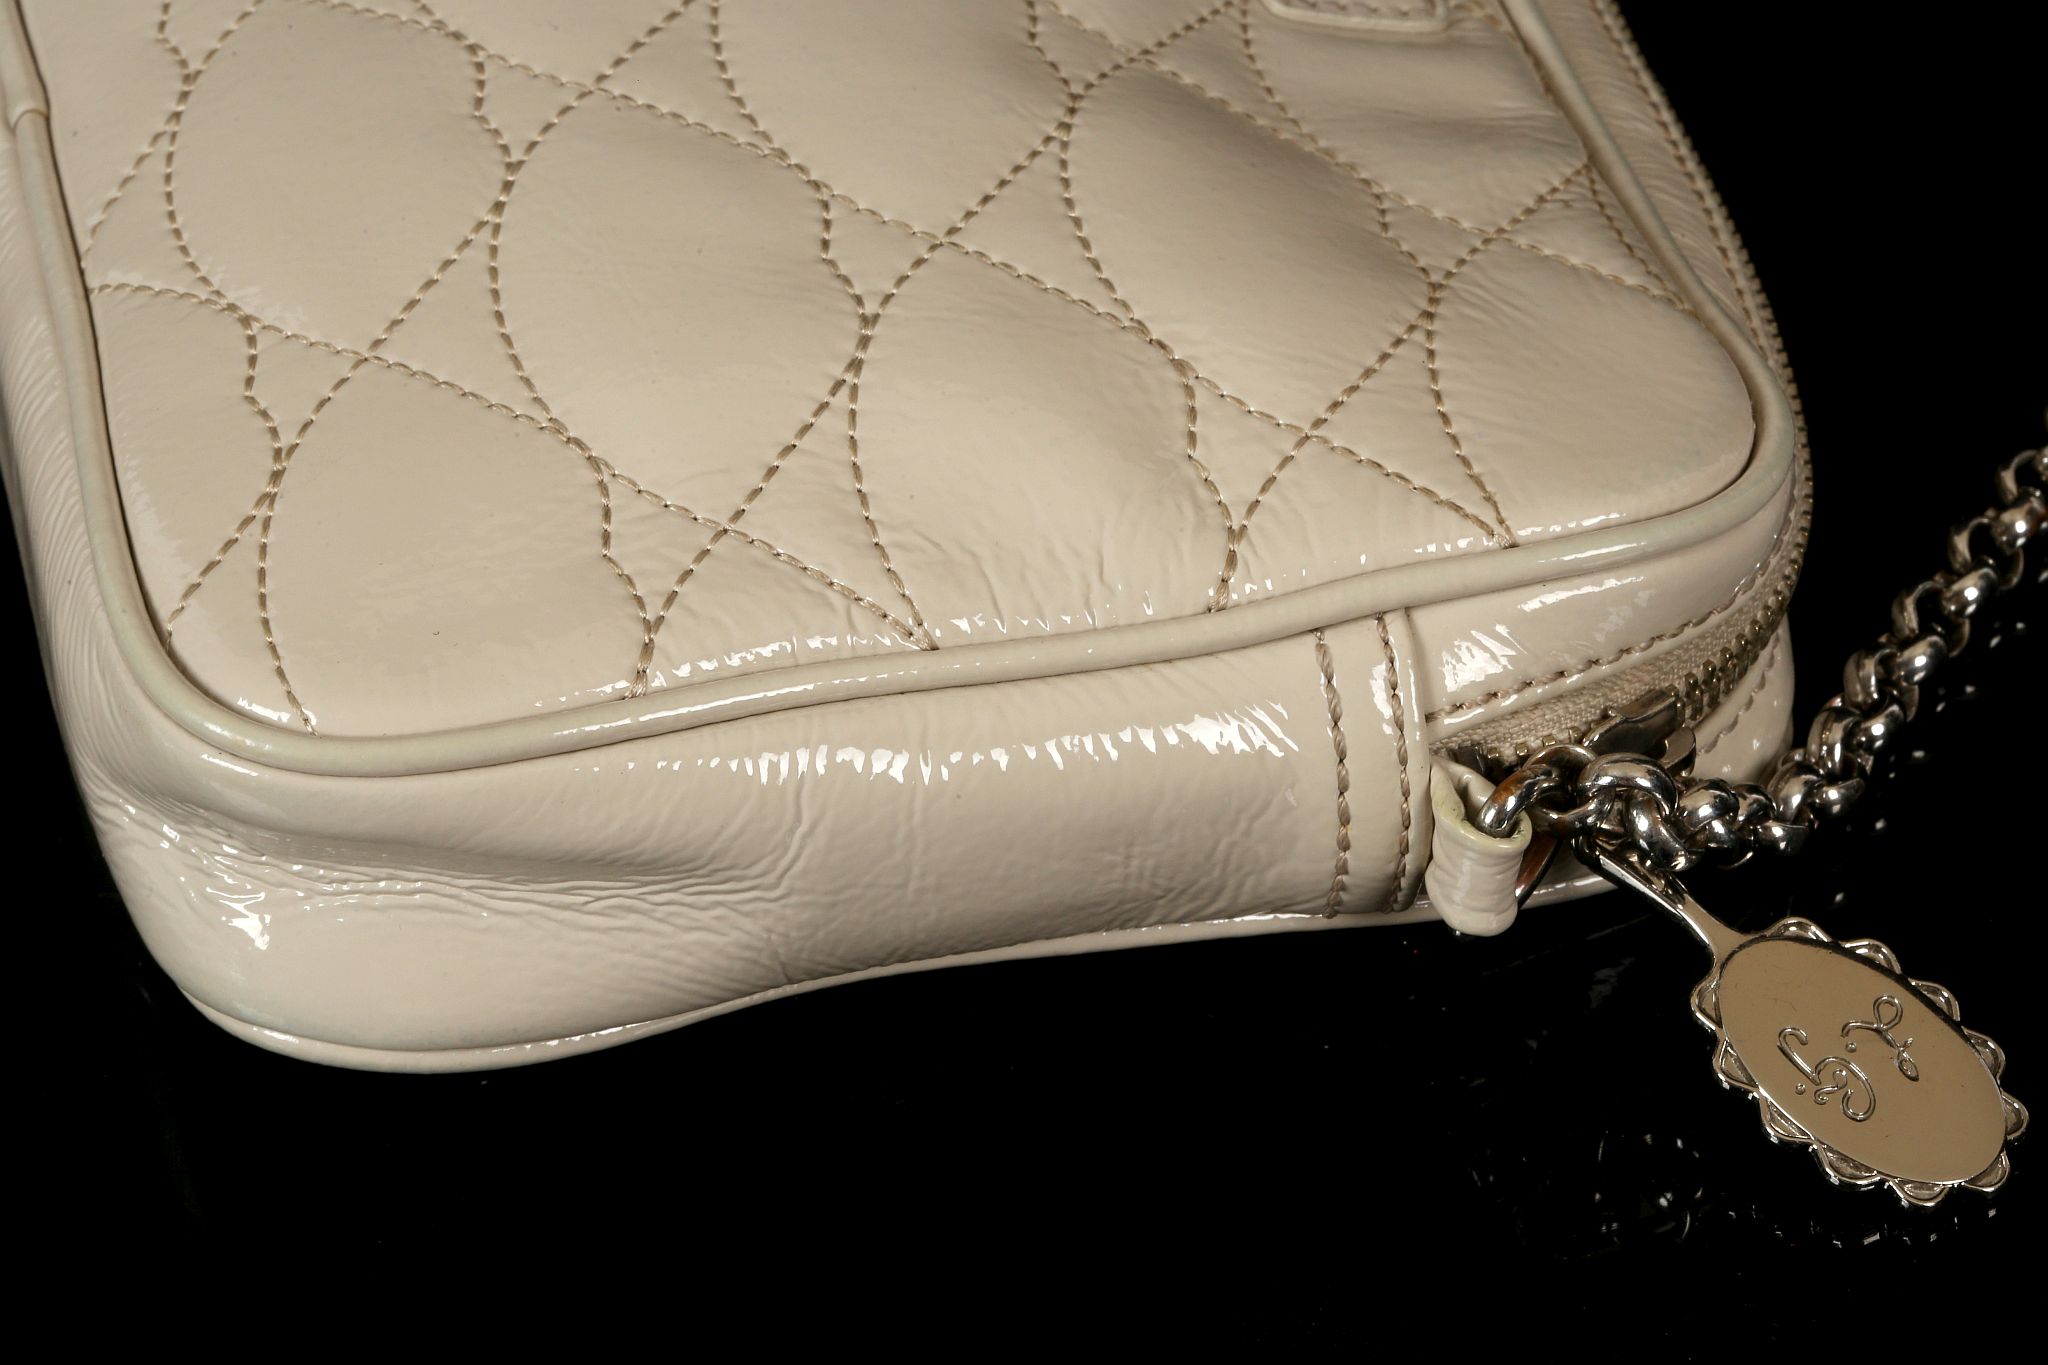 LULU GUINNESS LIPS HANDBAG, beige patent leather with stitched lips pattern, silver tone hardware, - Image 9 of 12